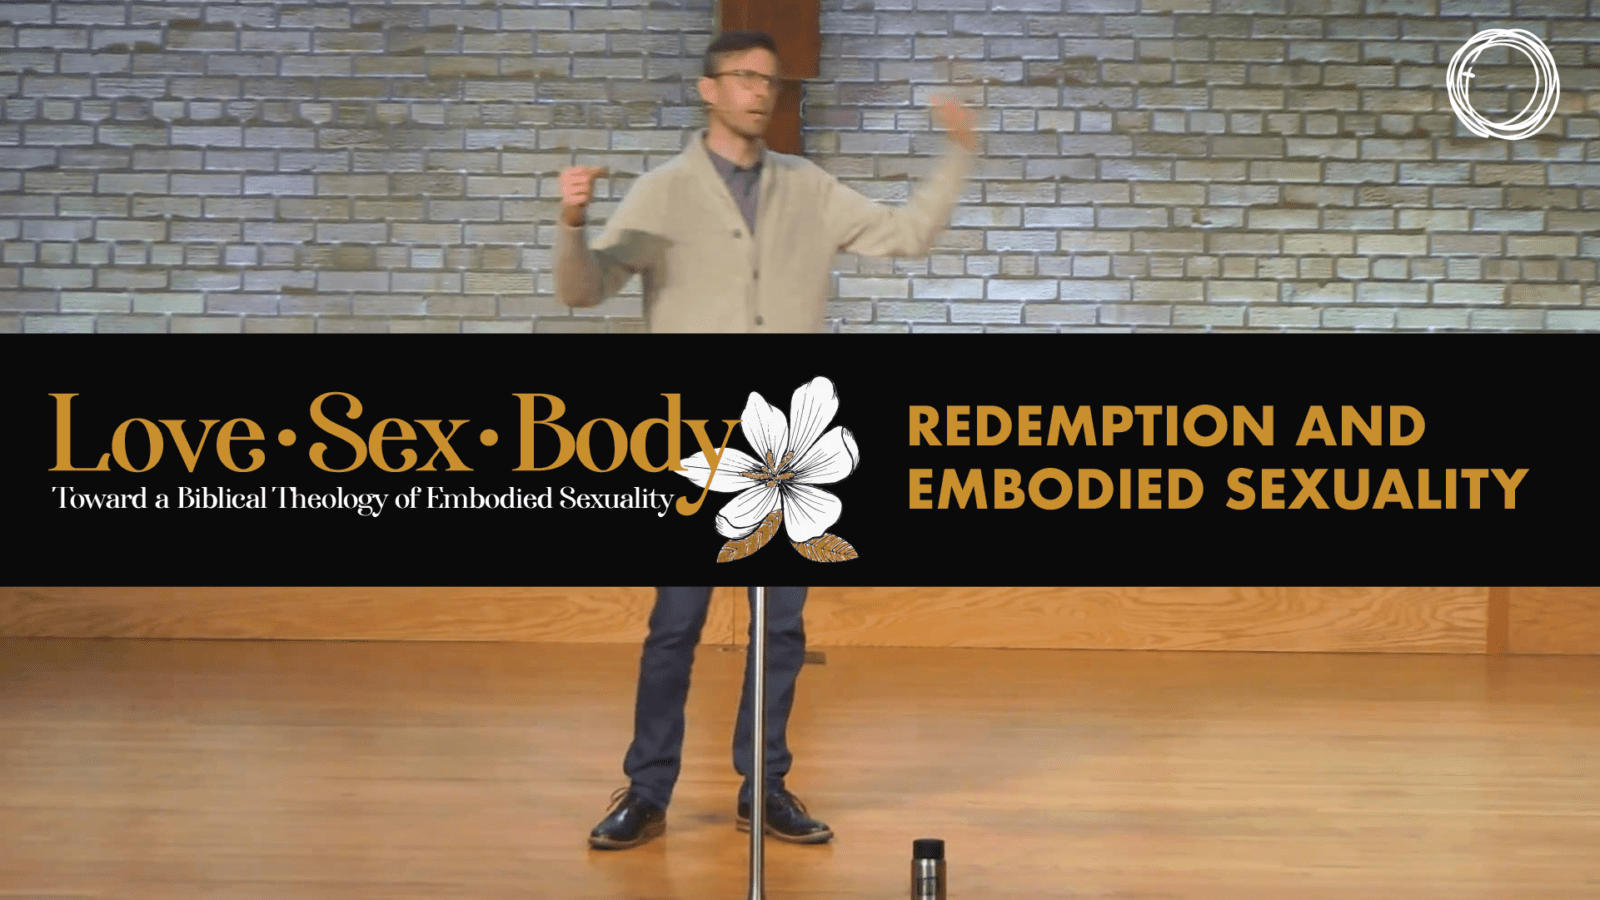 Redemption and Embodied Sexuality